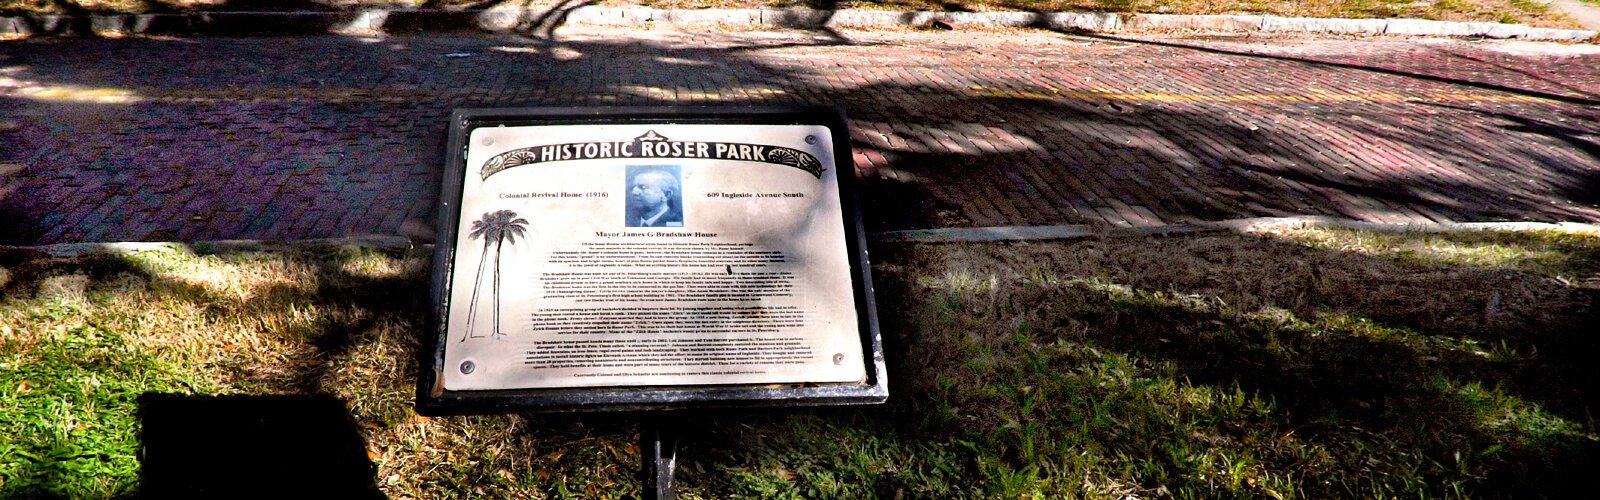 Winding along Booker Creek and throughout the neighborhood, the Historic Roser Park Outdoor Museum features 28 markers describing the district’s attributes and history.